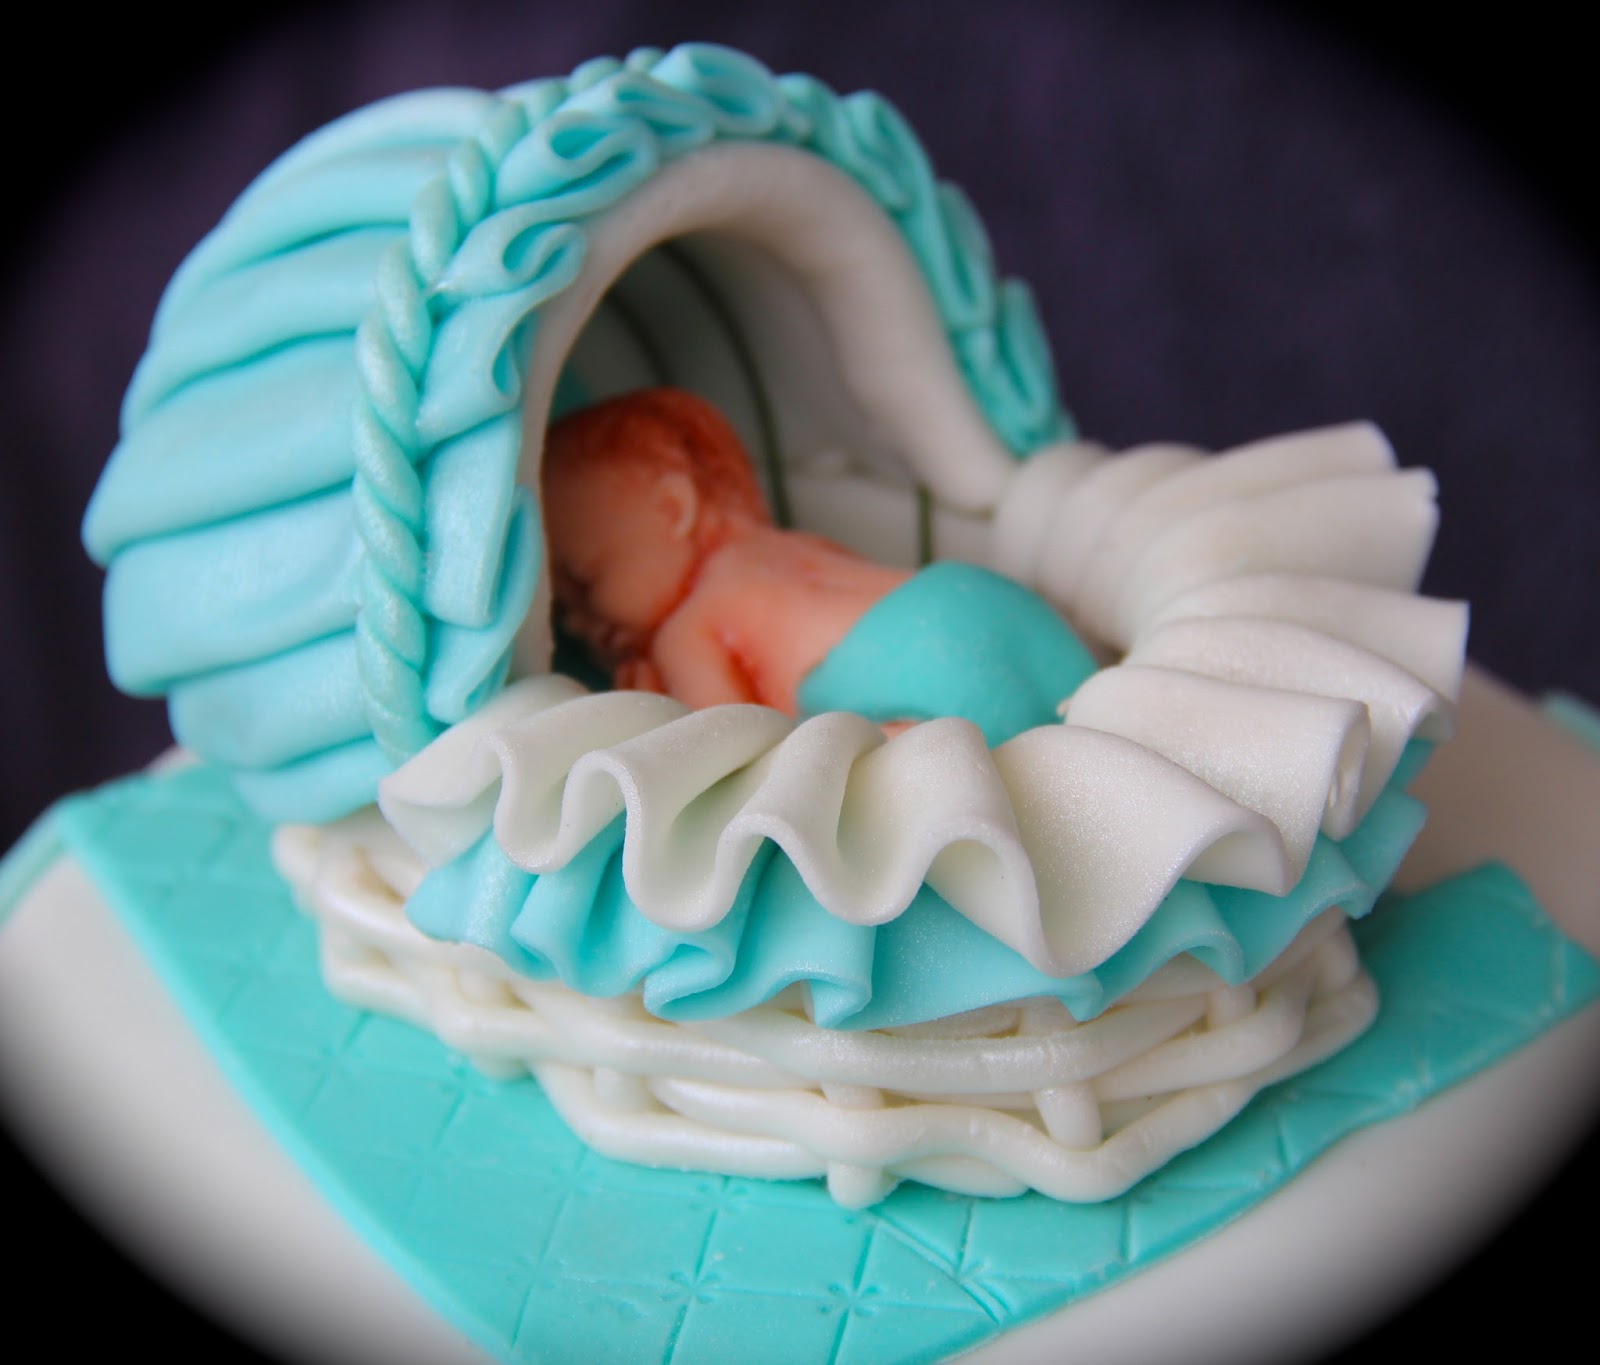 Ema's Creation: One Month Baby Cake